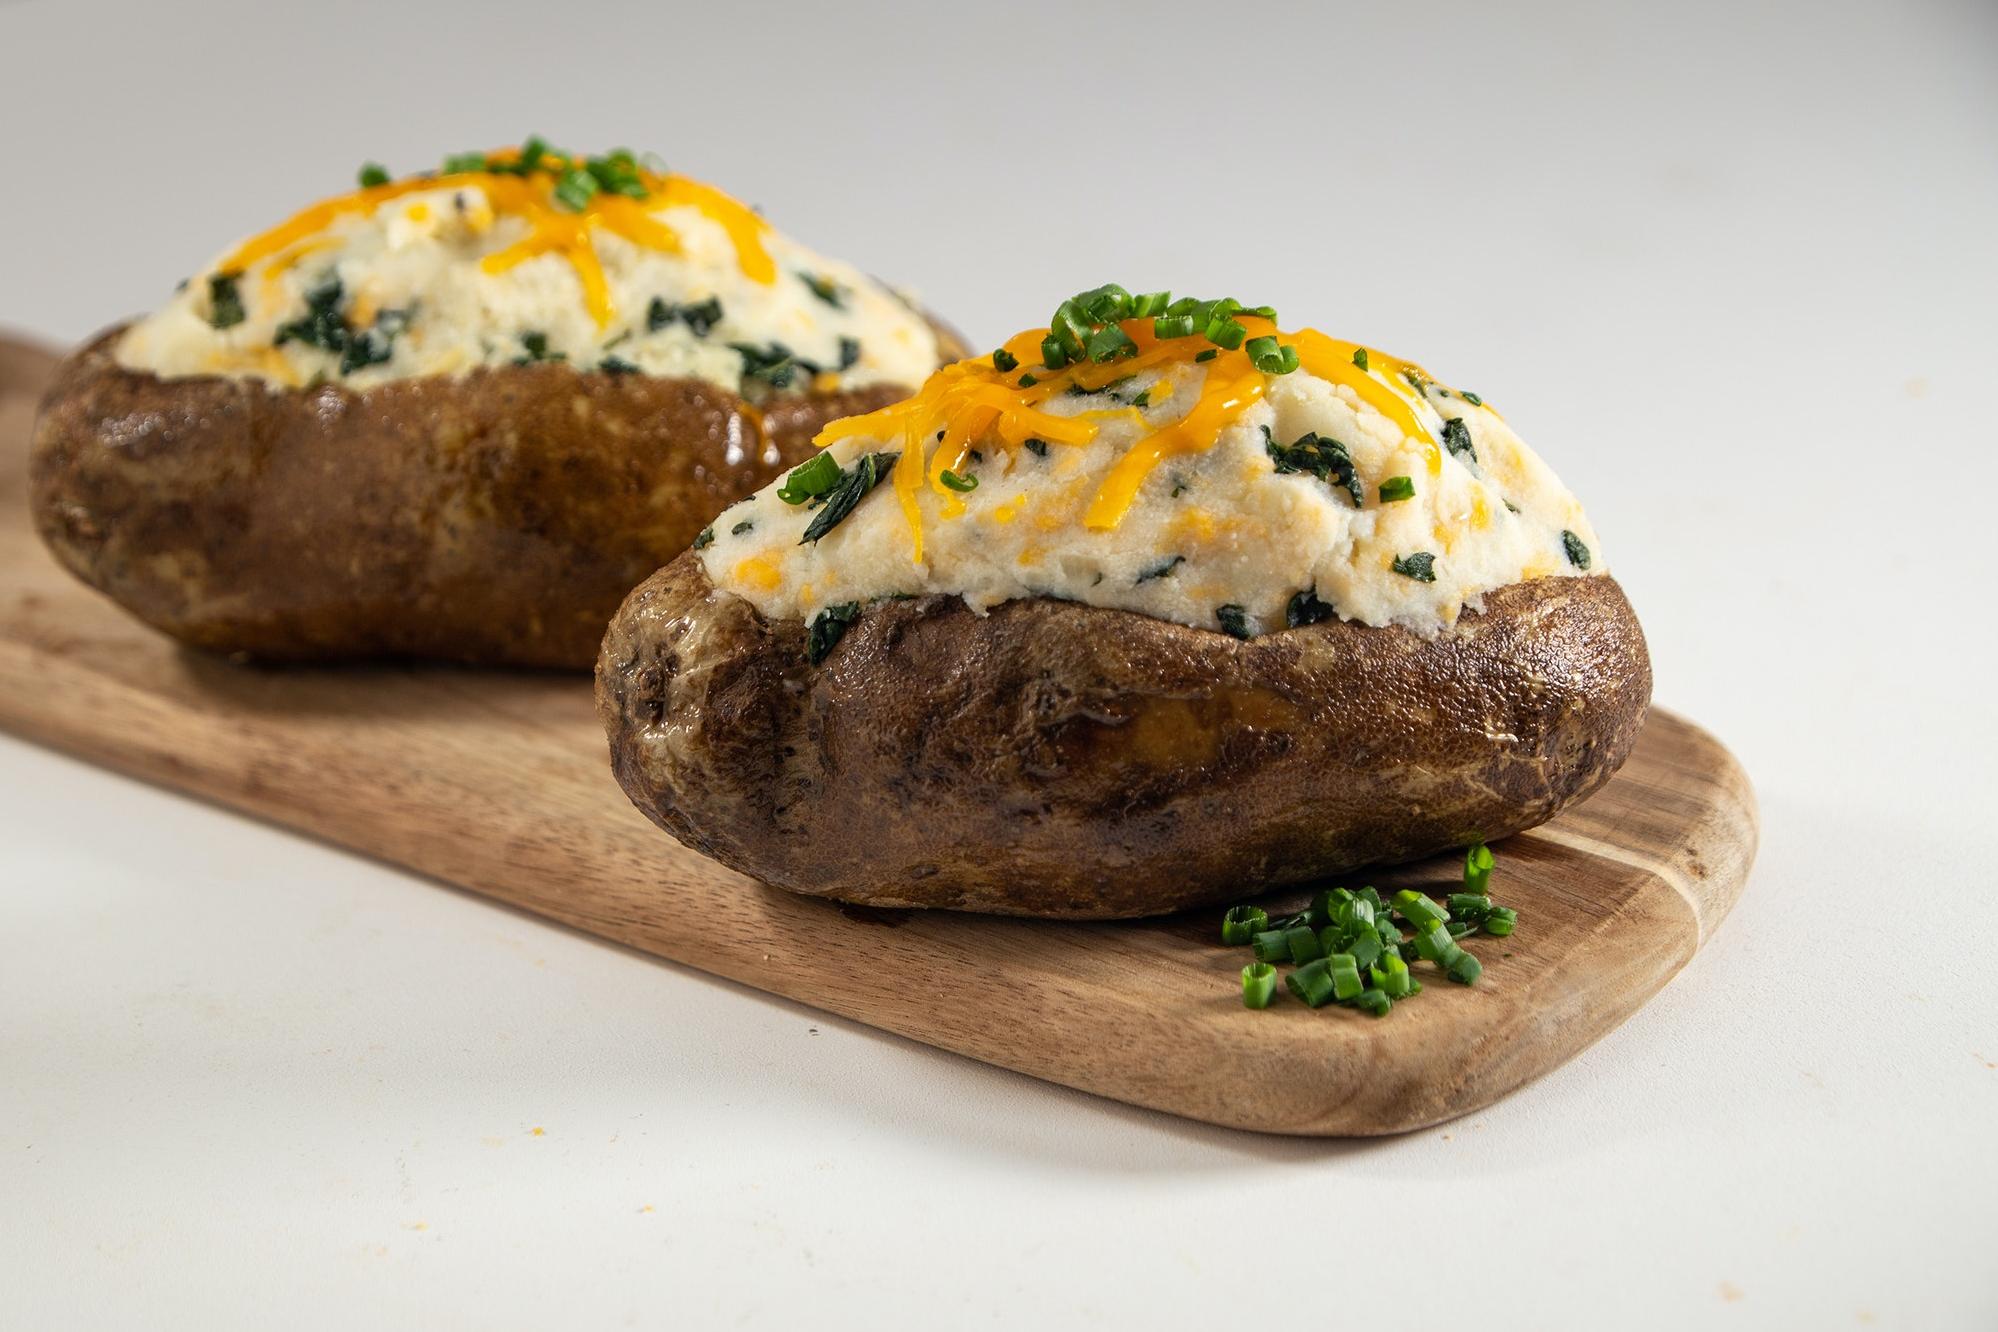  Perfectly baked potatoes filled with flavorful ingredients